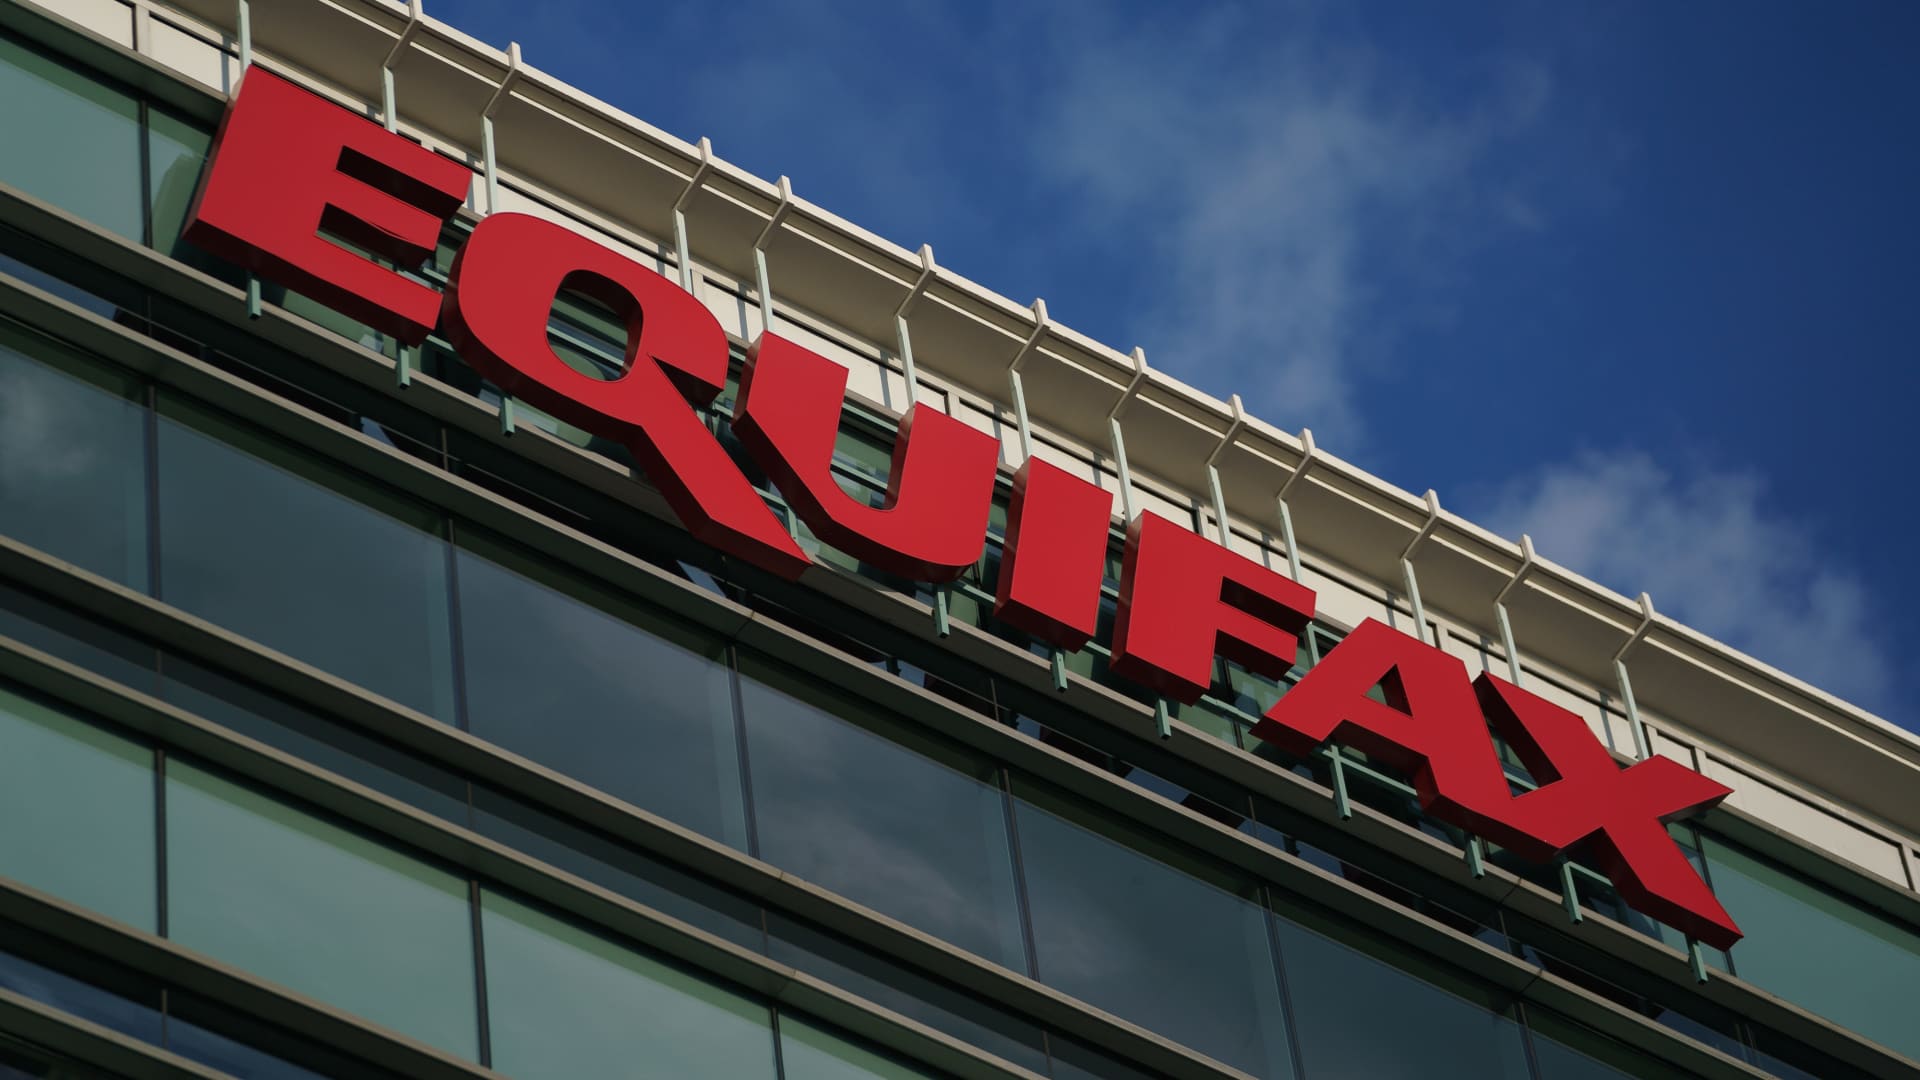 Some Equifax settlement checks bounced due to 'clerical error' at failed Signature Bank